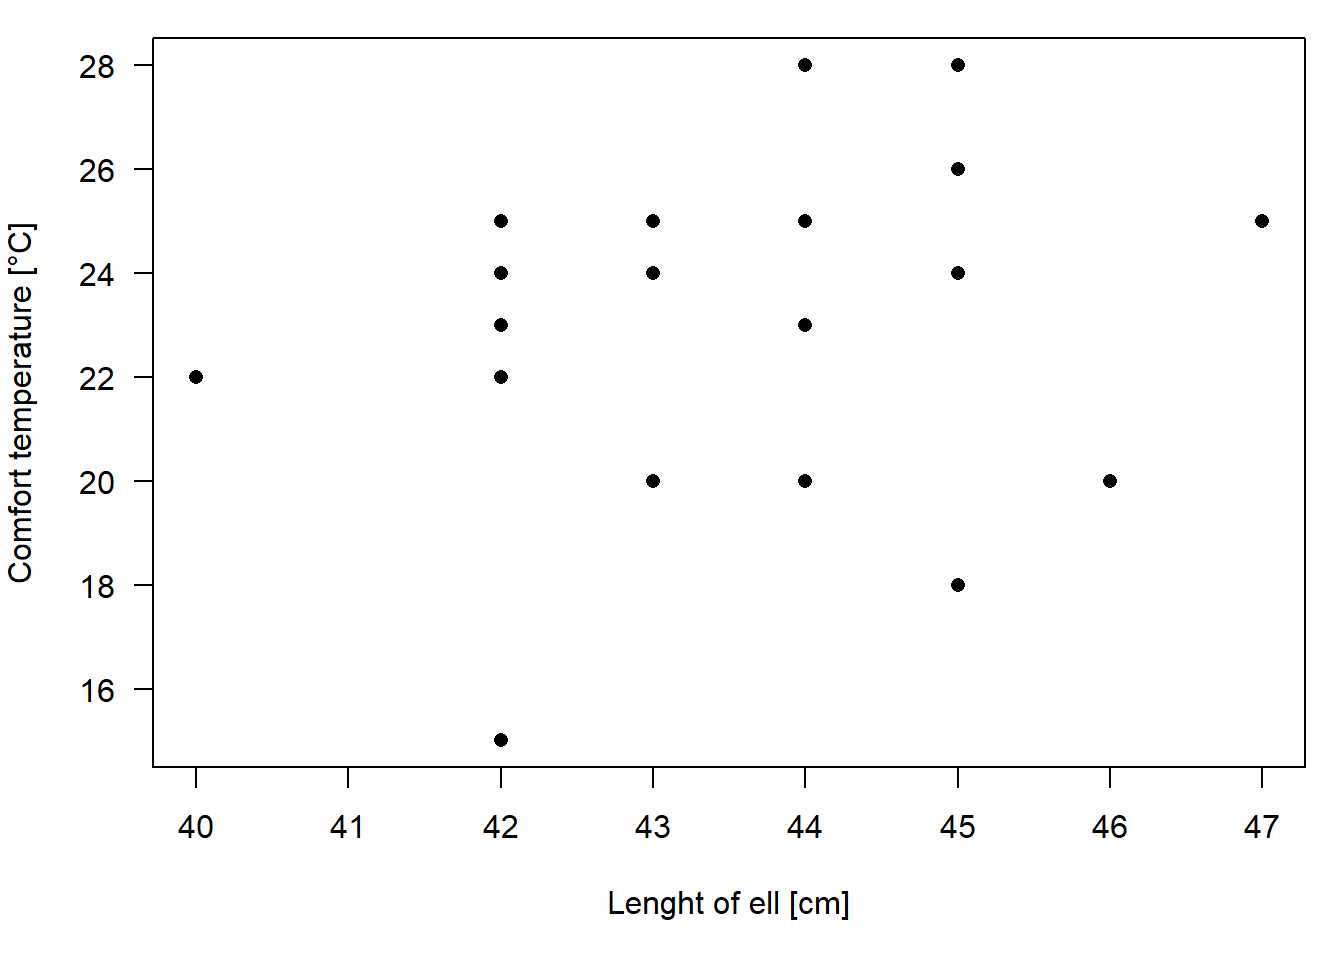 Scatterplot of the length of ell and the comfort temperature of statistics course participants.